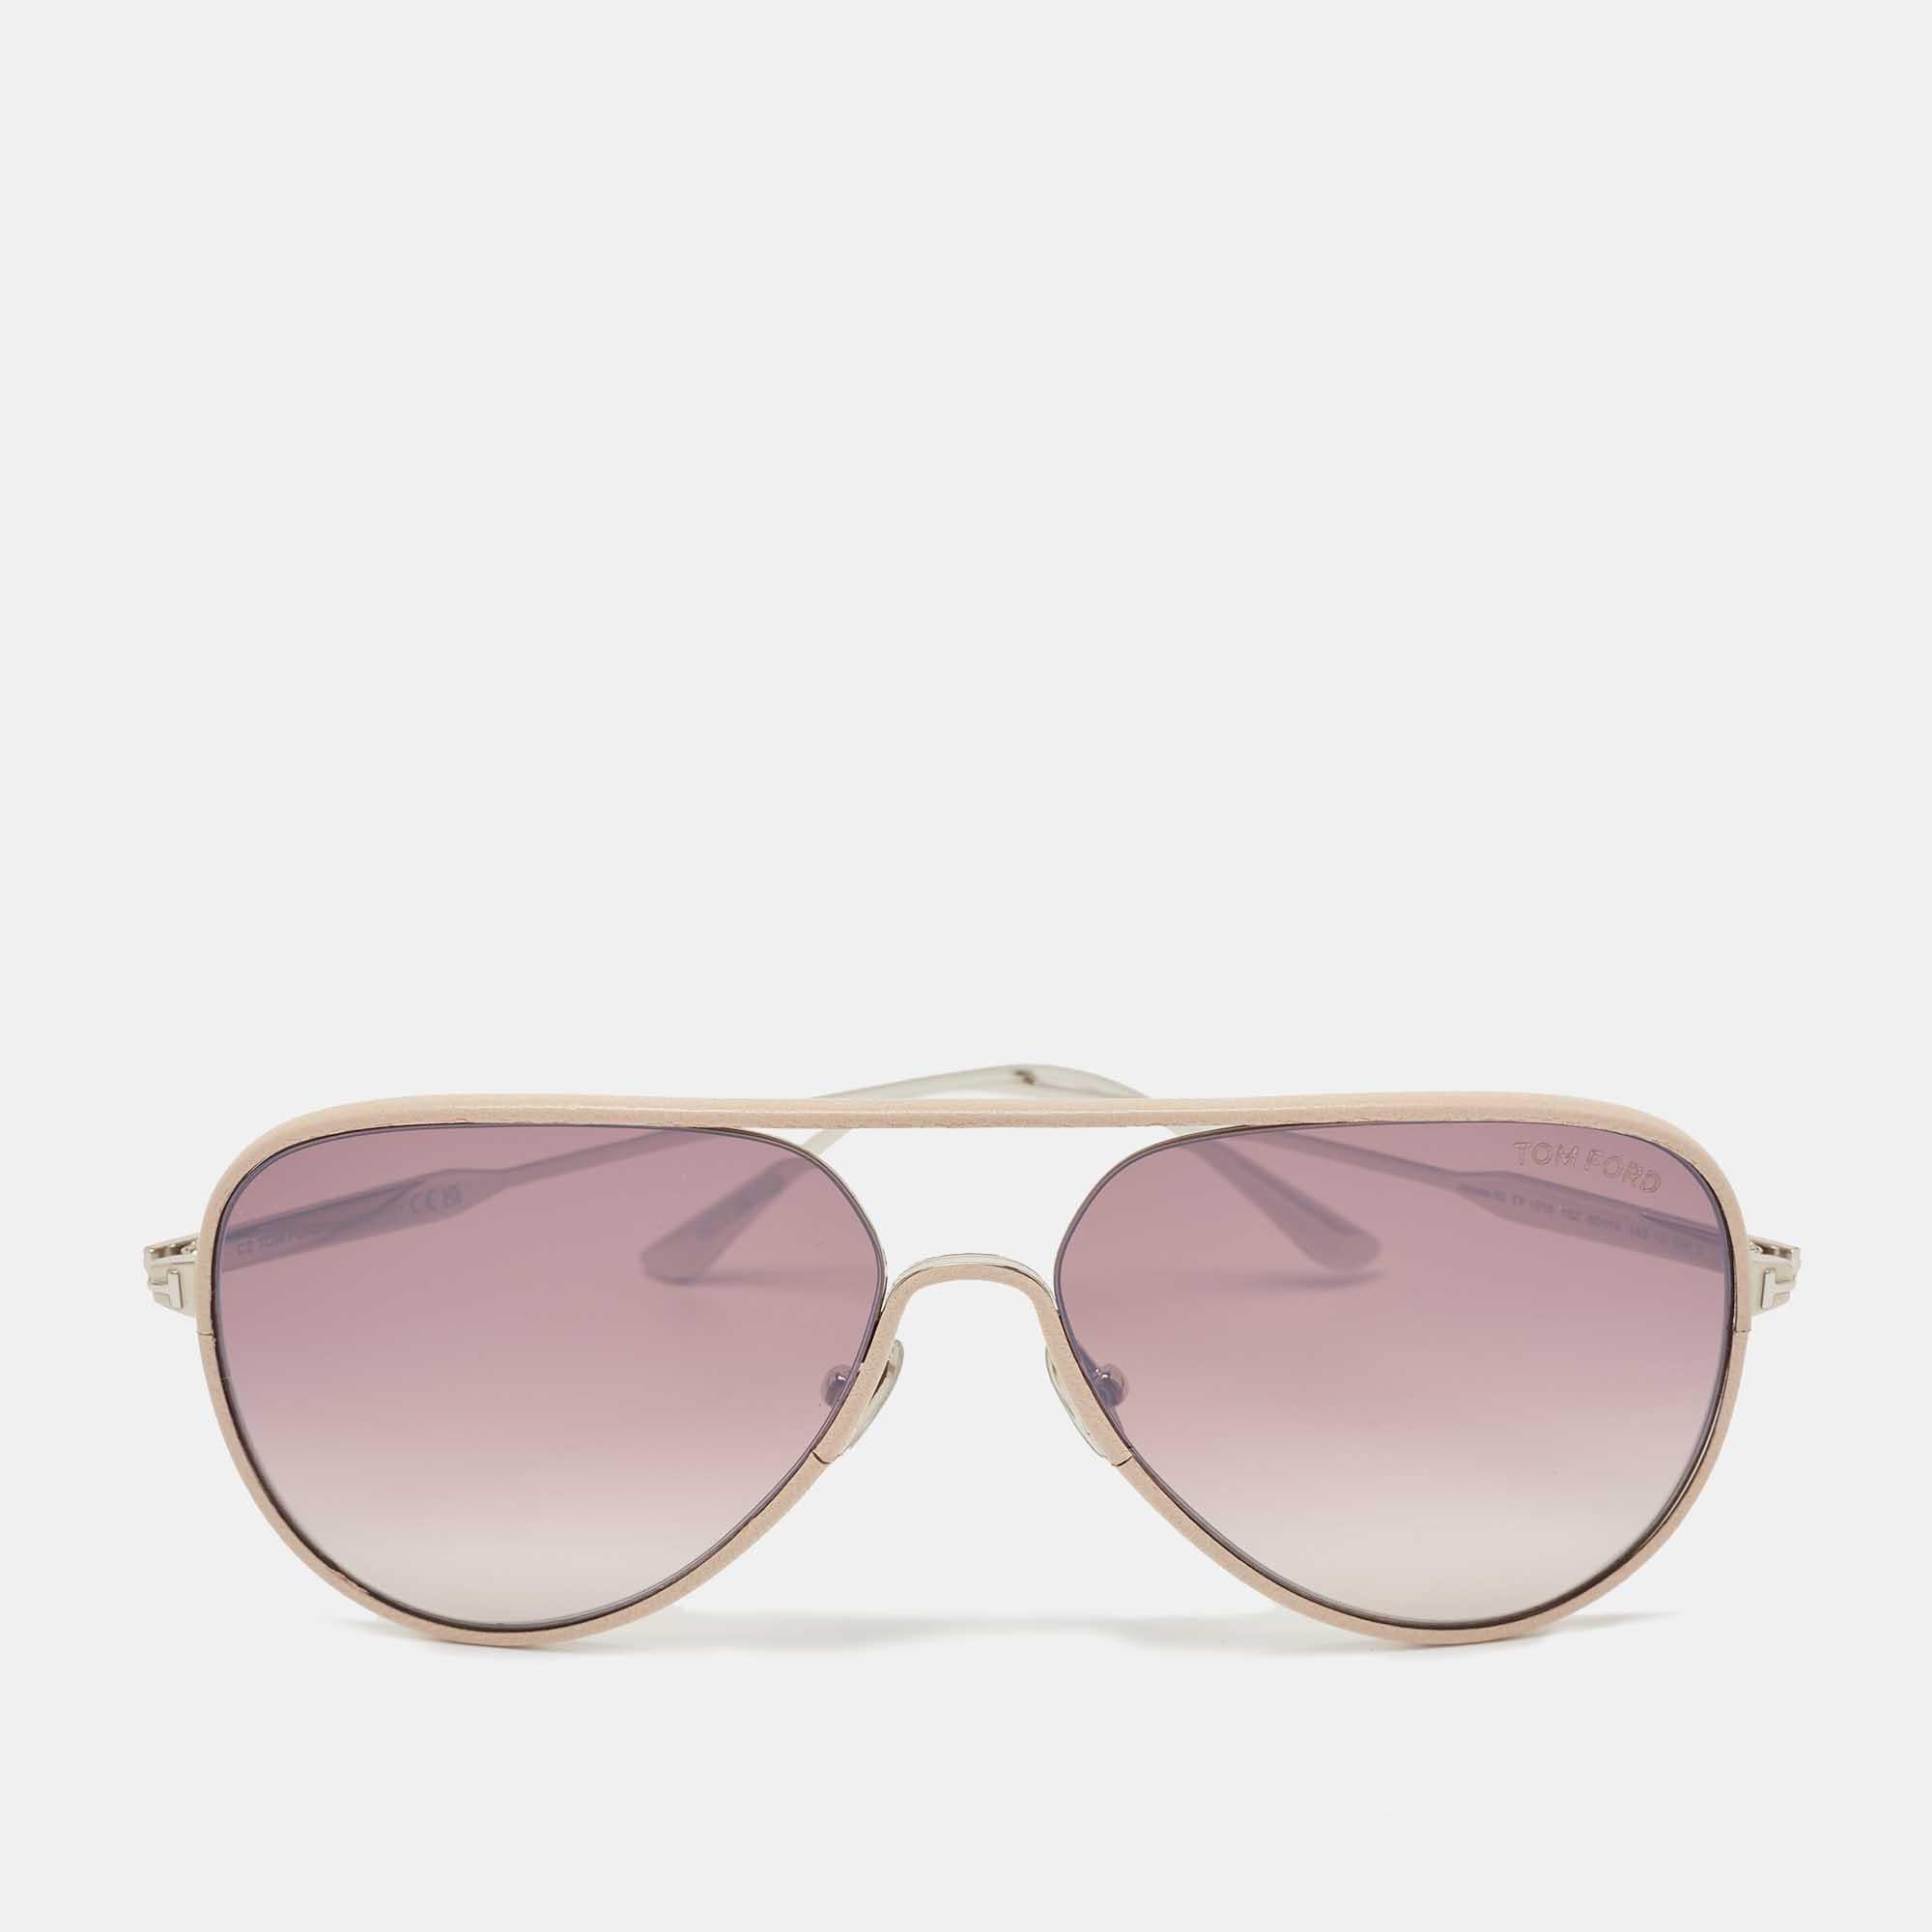 This pair of Tom Ford sunglasses is expertly crafted for women with high taste in fashion. A perfect companion for sunny day outings, it exhibits silver-tone hardware and branded temples.

Includes
Original Box, Info Booklet, Original Dust Cloth,